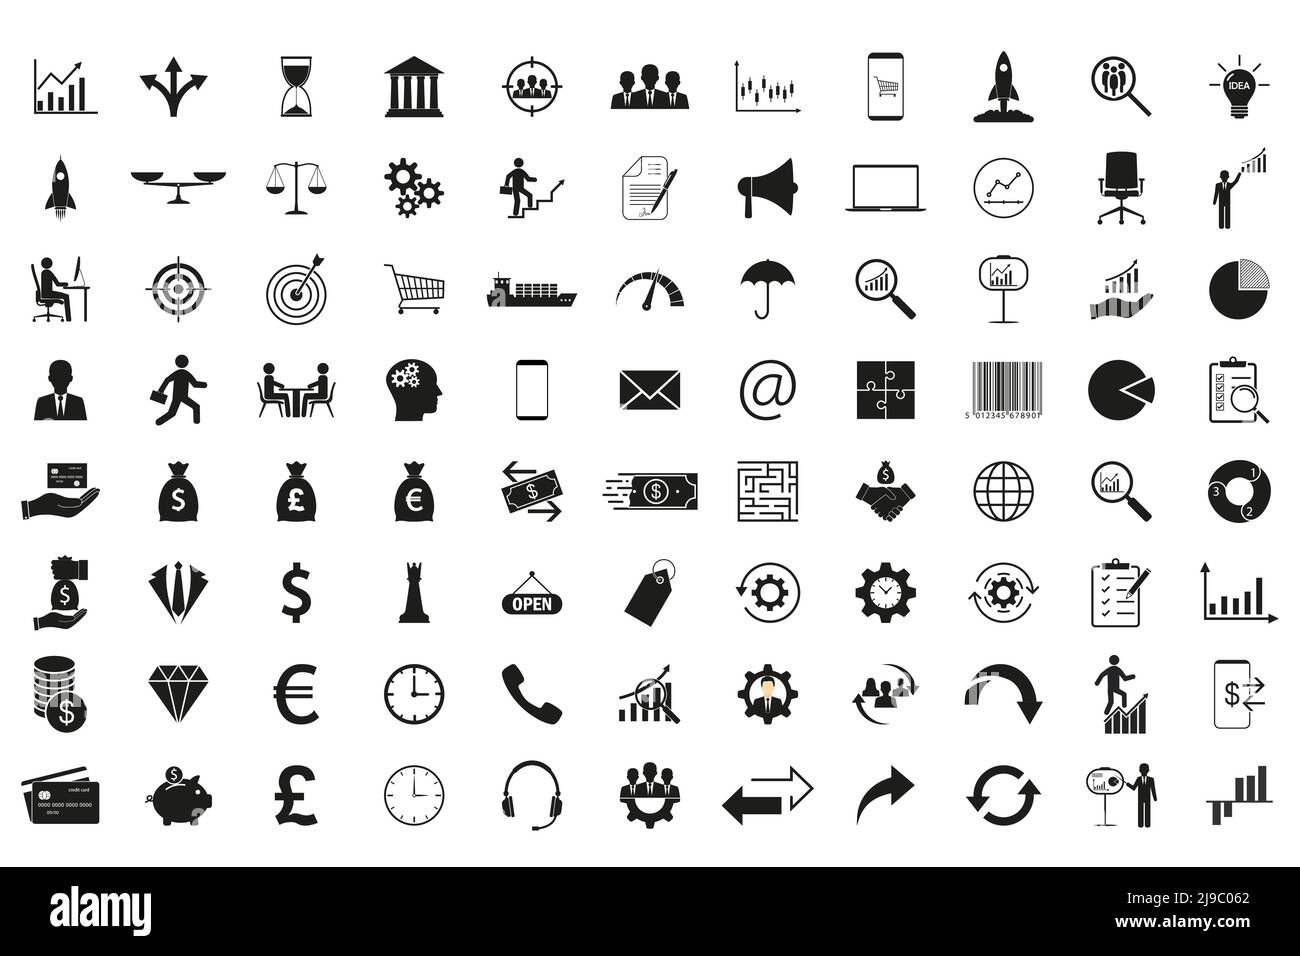 Business and management icons set. Vector illustration. Flat. Stock Vector